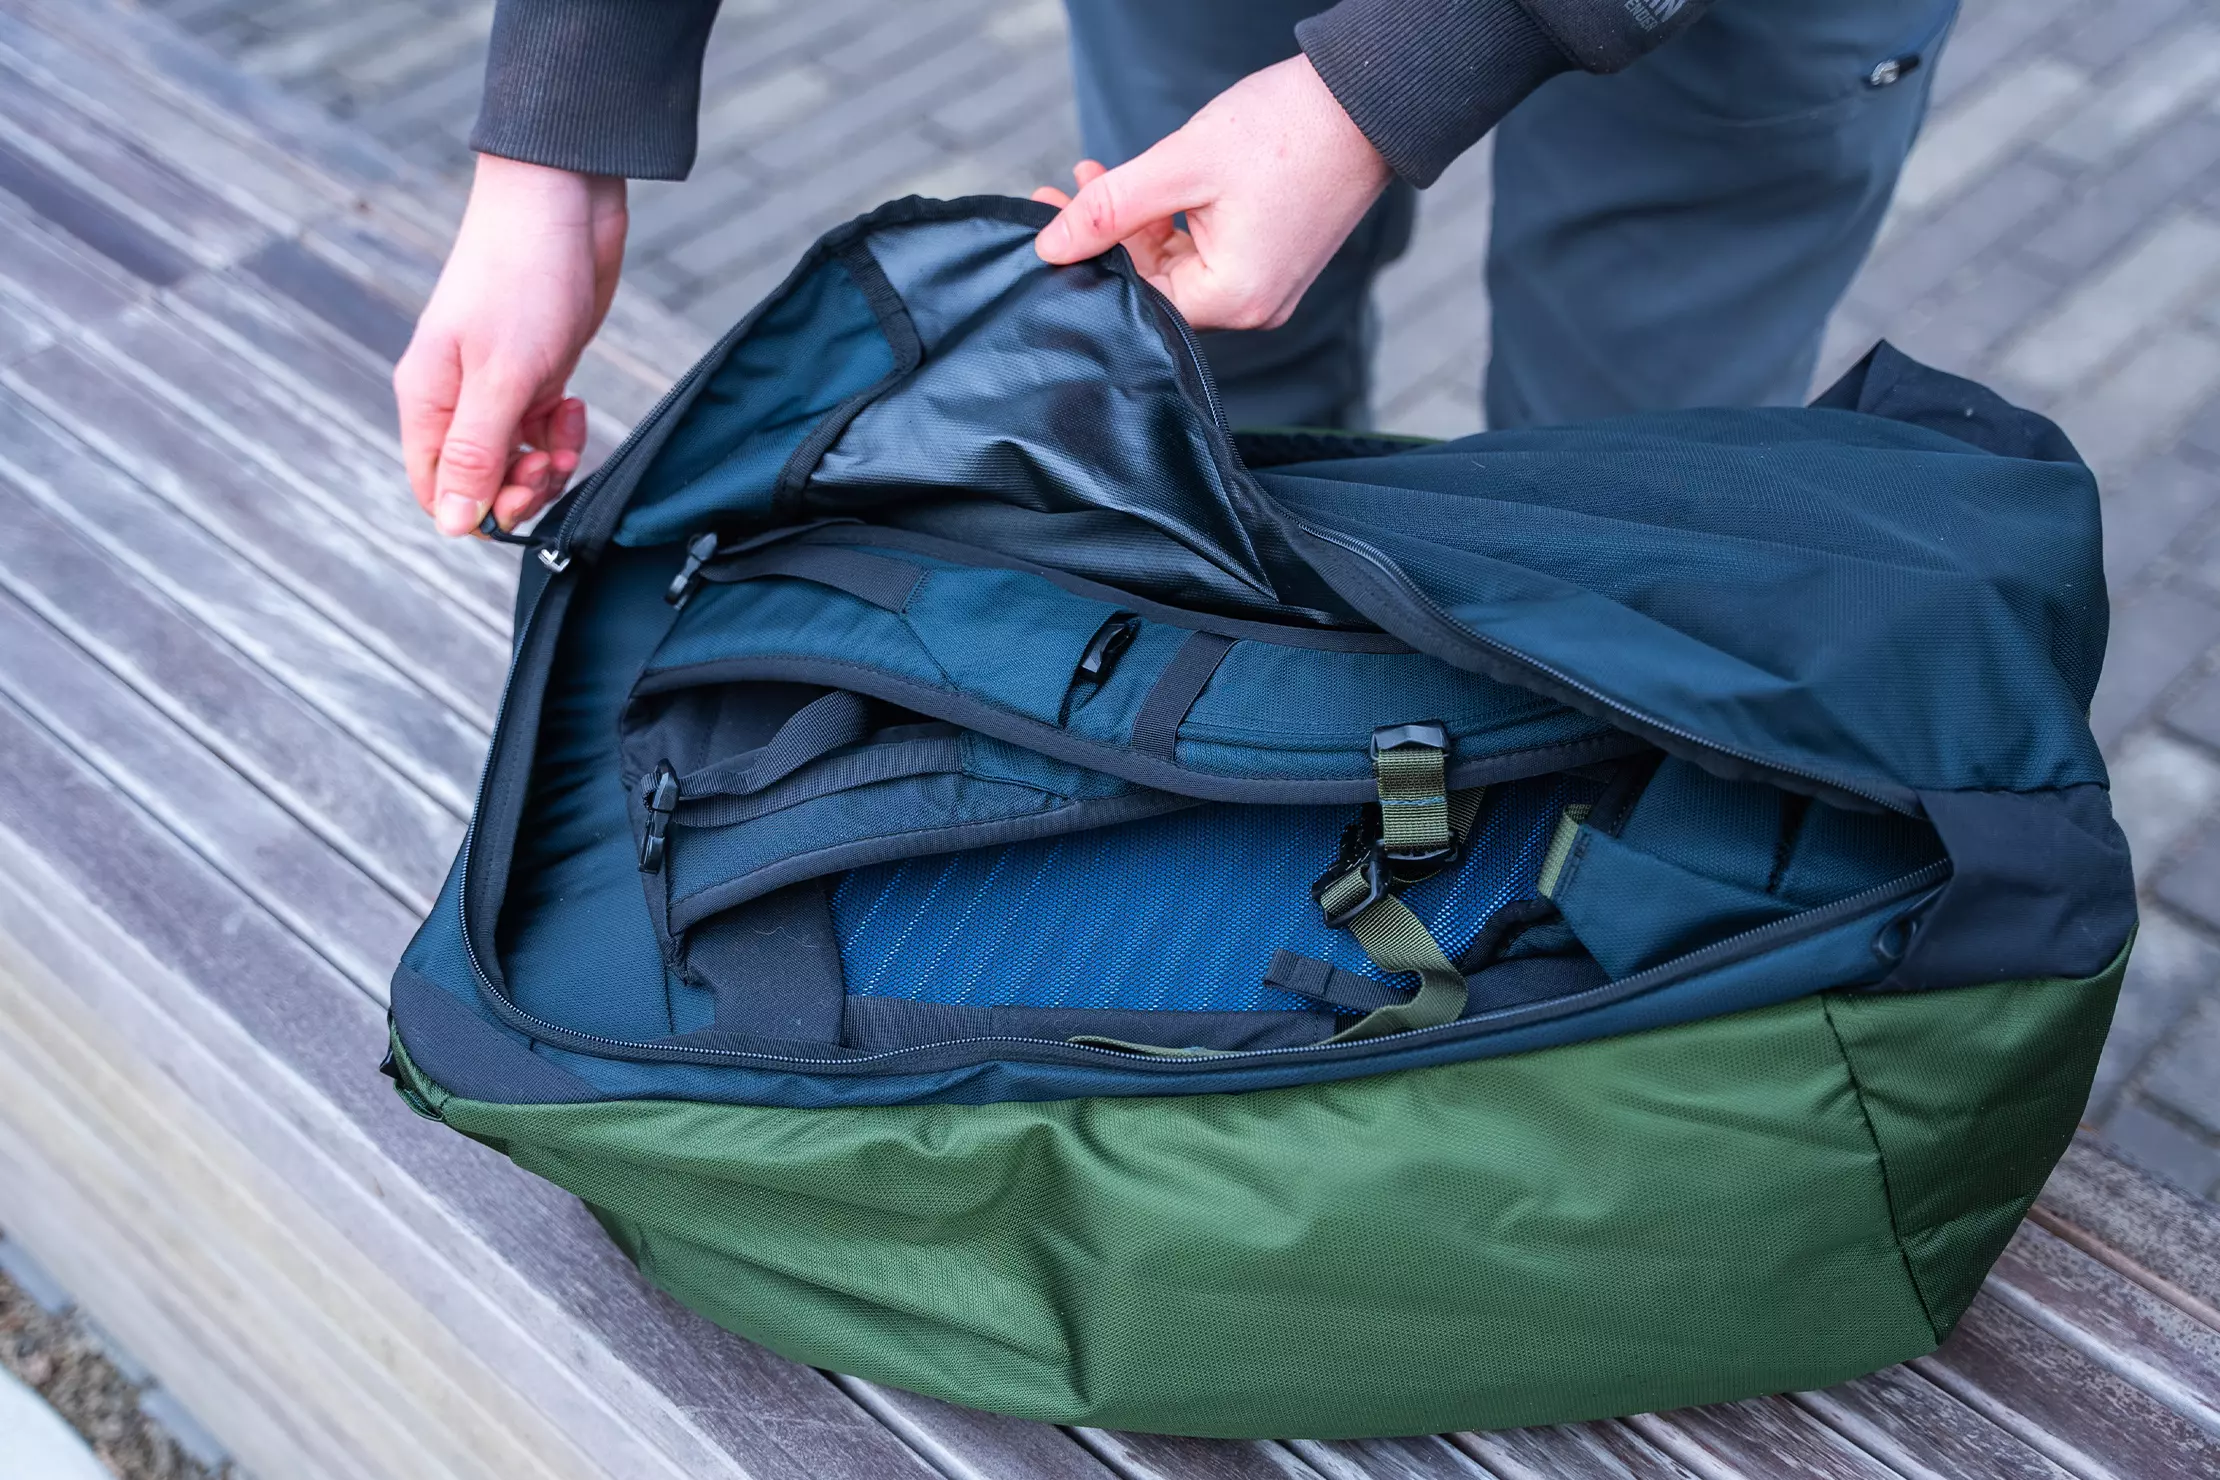 Osprey Farpoint 55 Travel Pack 2 Bags